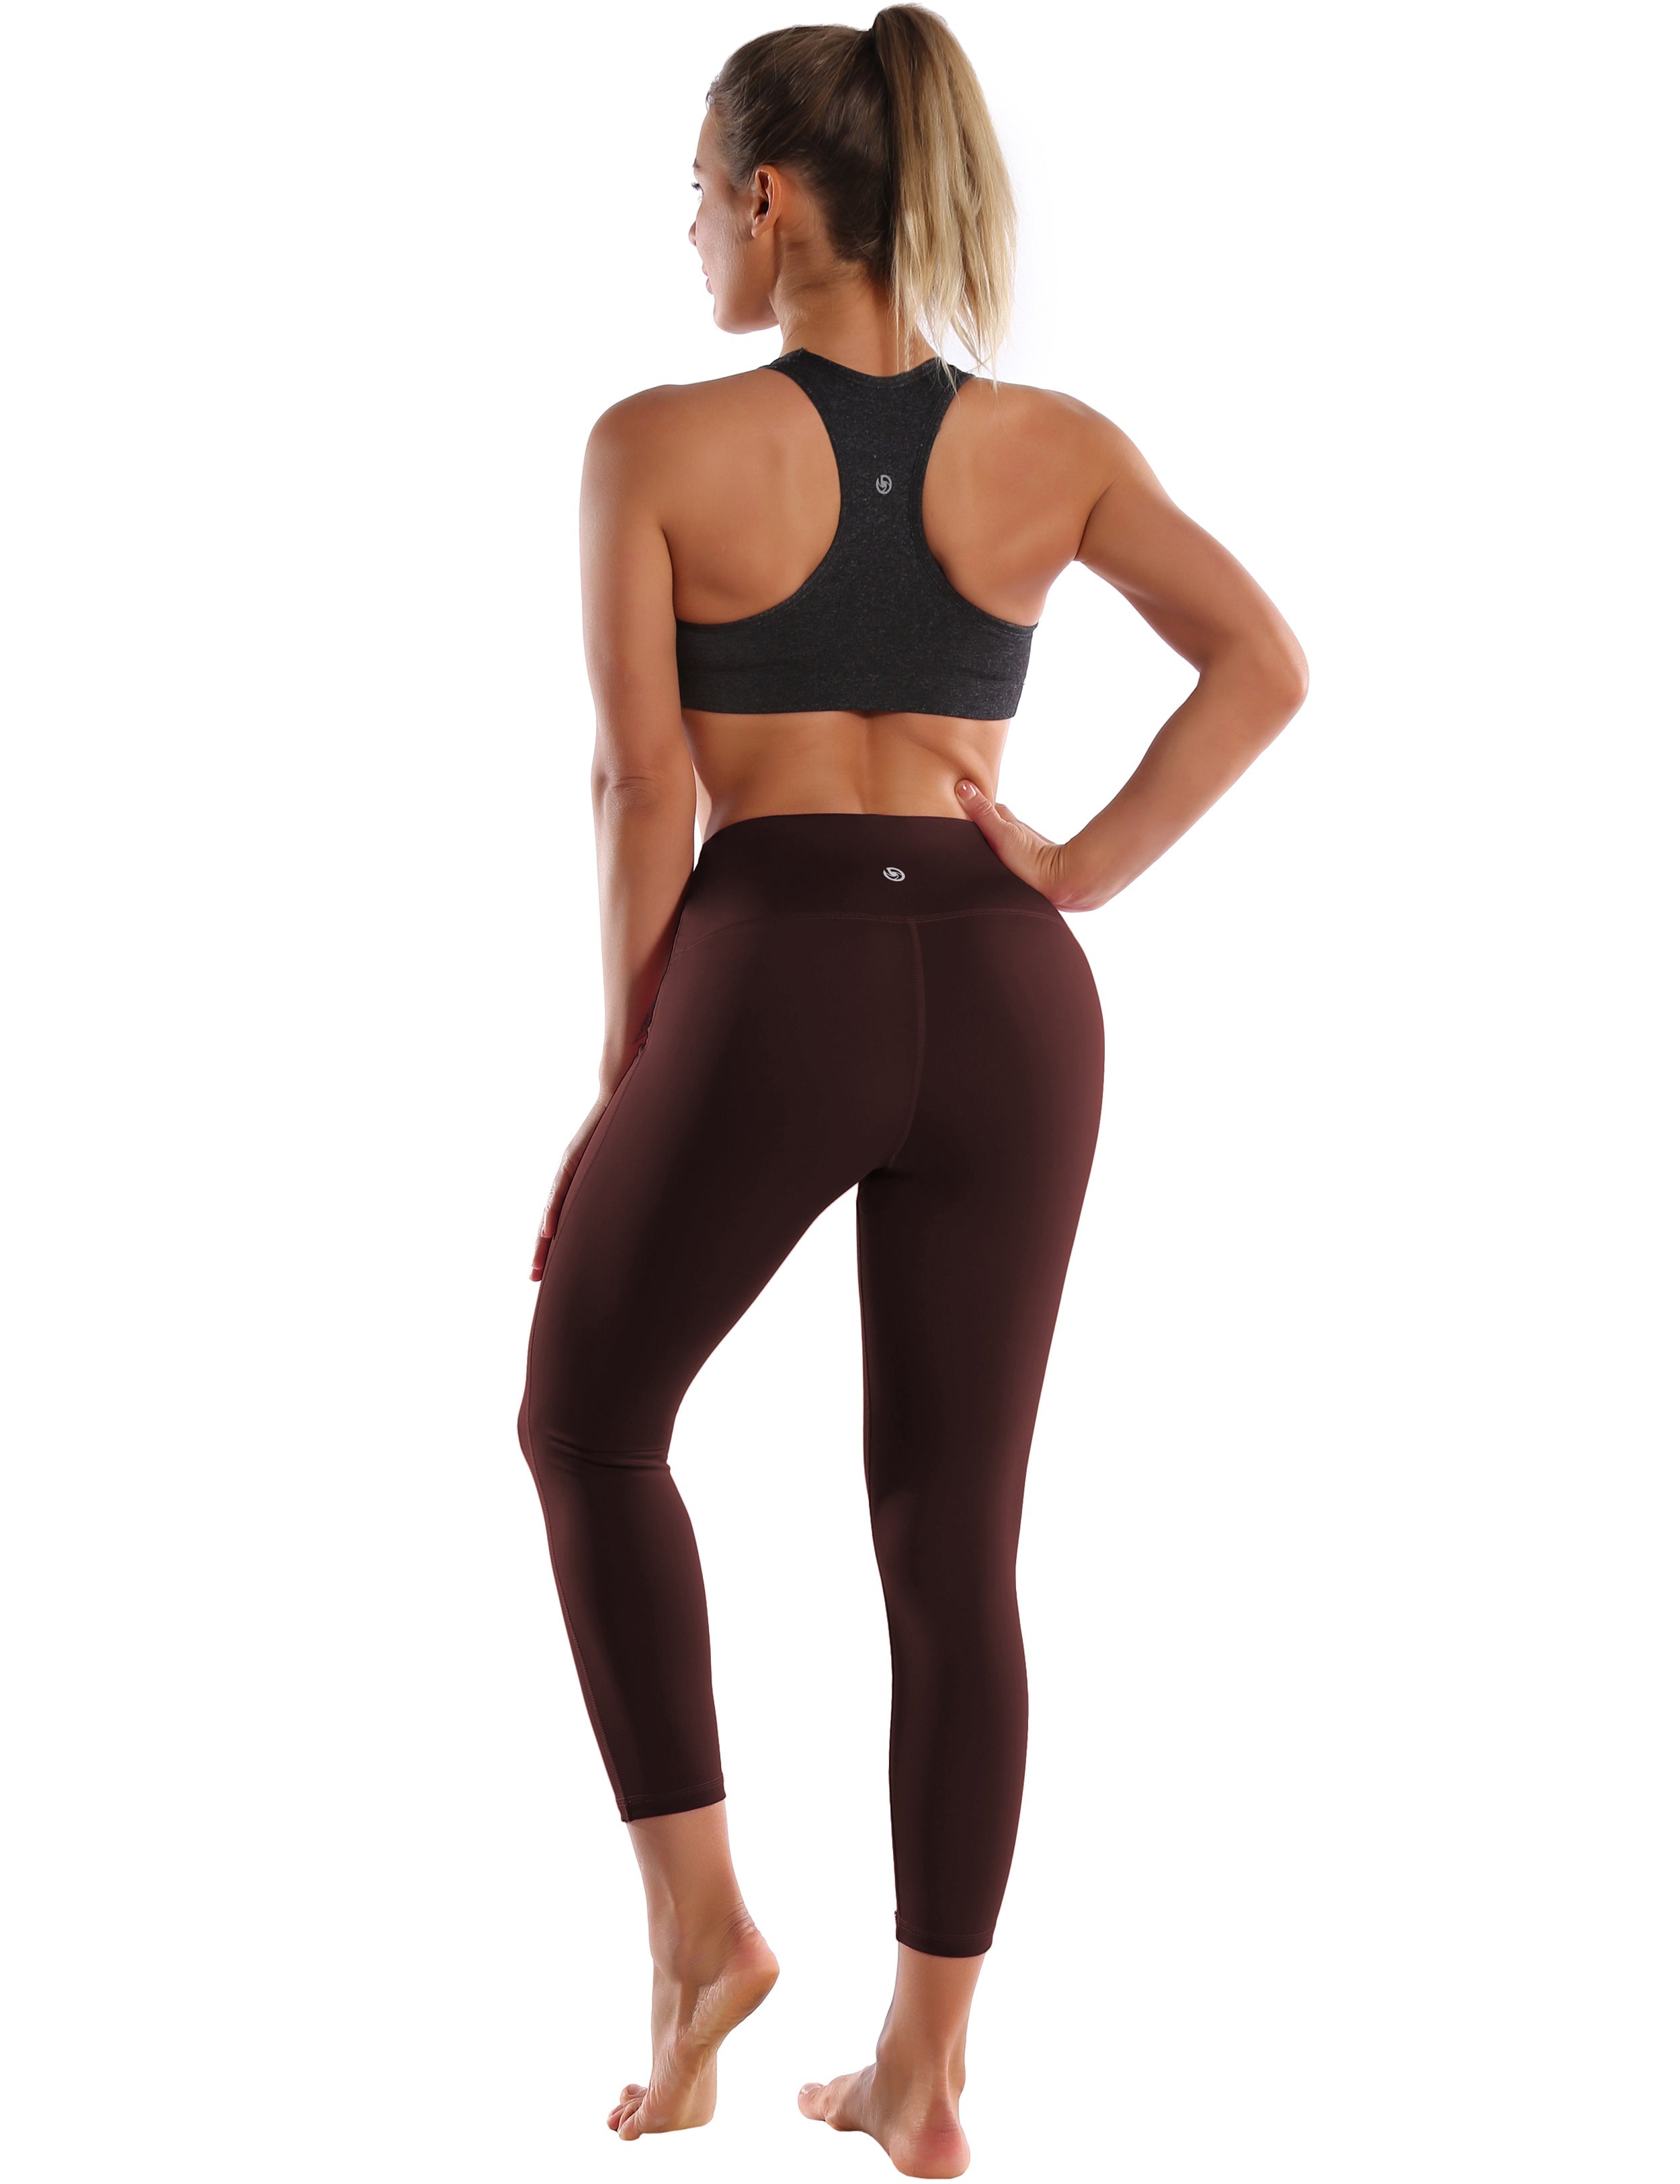 22" High Waist Side Line Capris mahoganymaroon 75%Nylon/25%Spandex Fabric doesn't attract lint easily 4-way stretch No see-through Moisture-wicking Tummy control Inner pocket